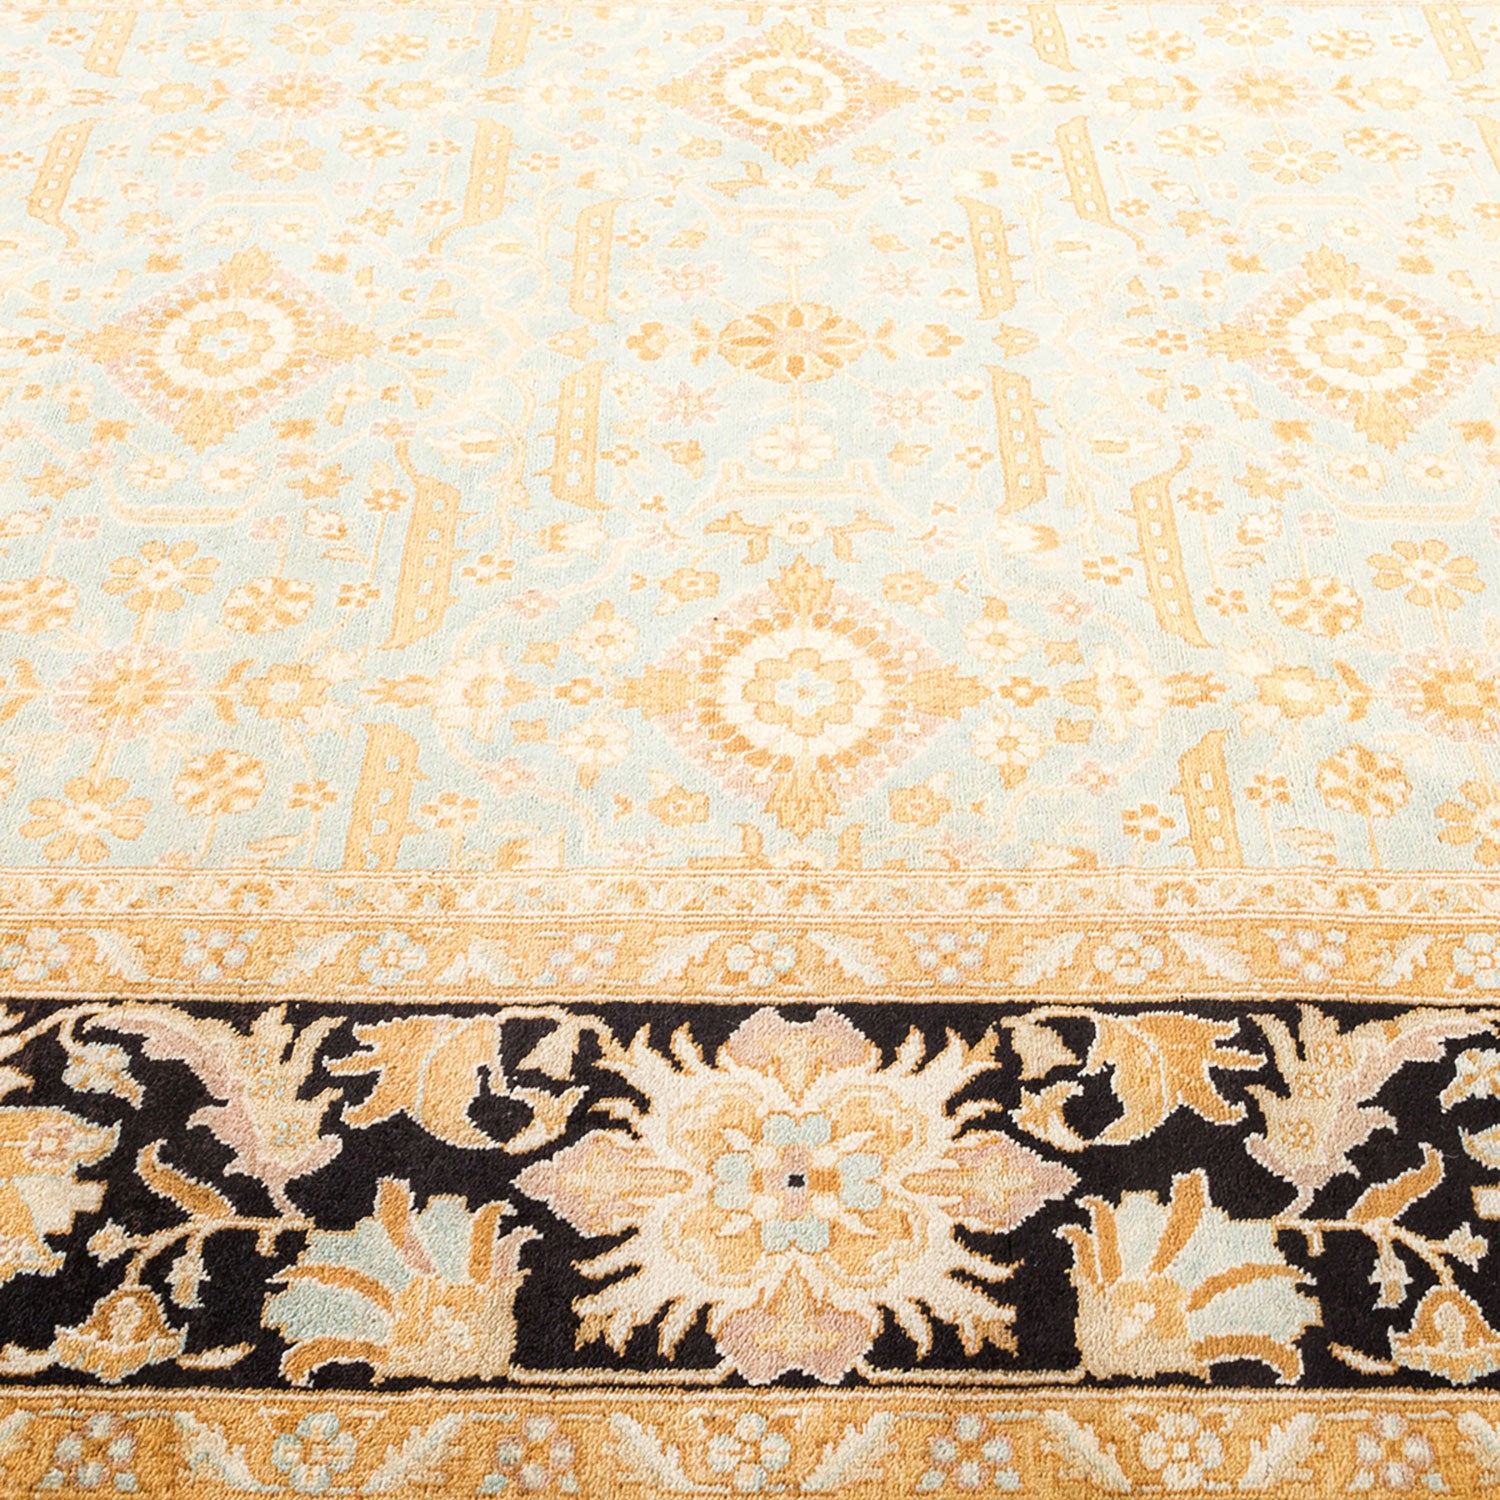 An intricate, traditional-style ornate carpet with floral and geometric motifs.